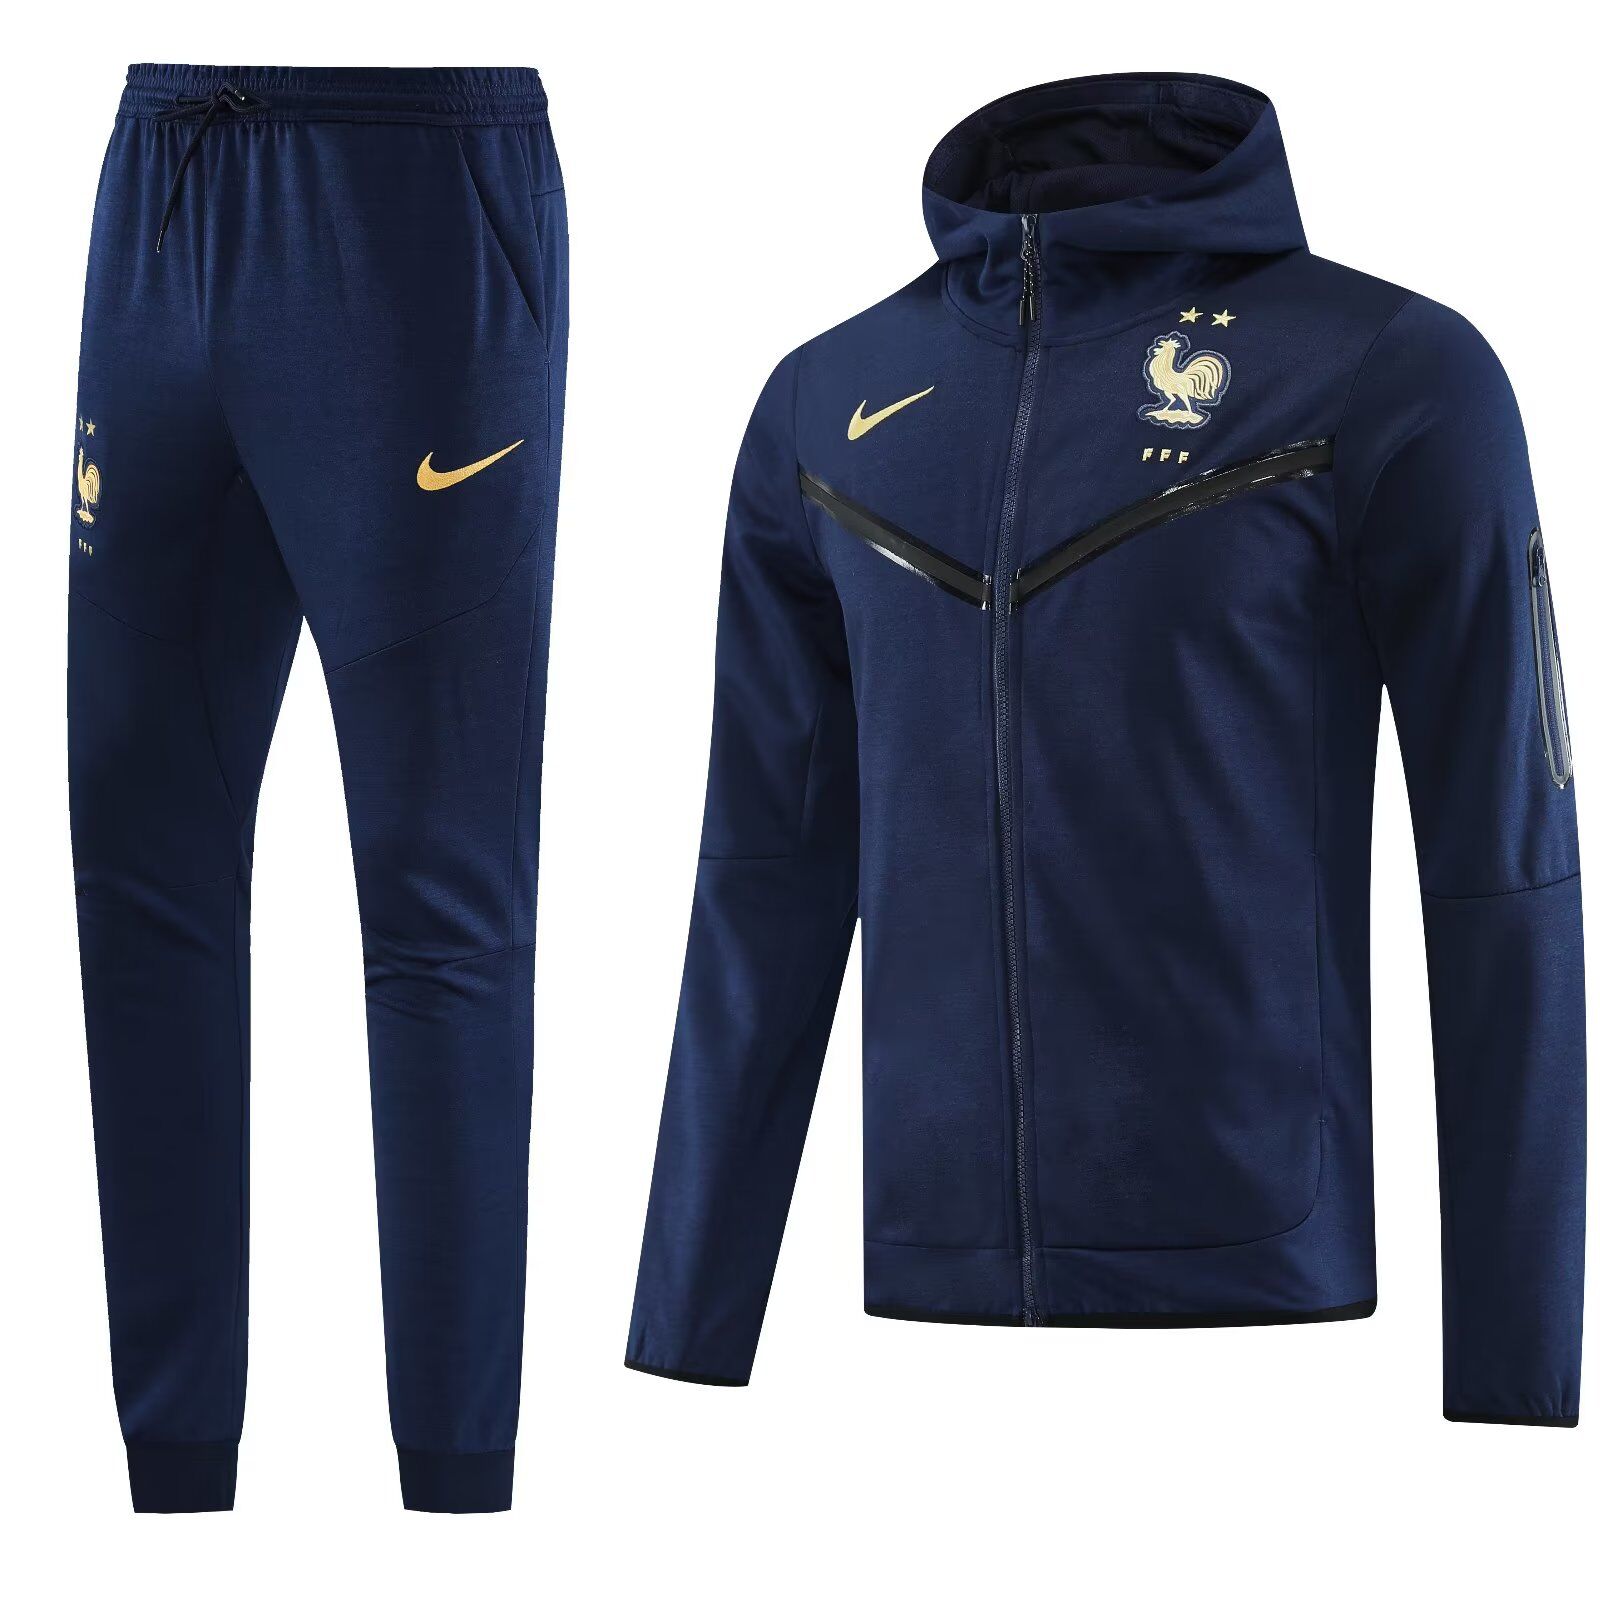 AAA Quality France 23/24 Hoodie Tracksuit - Navy Blue